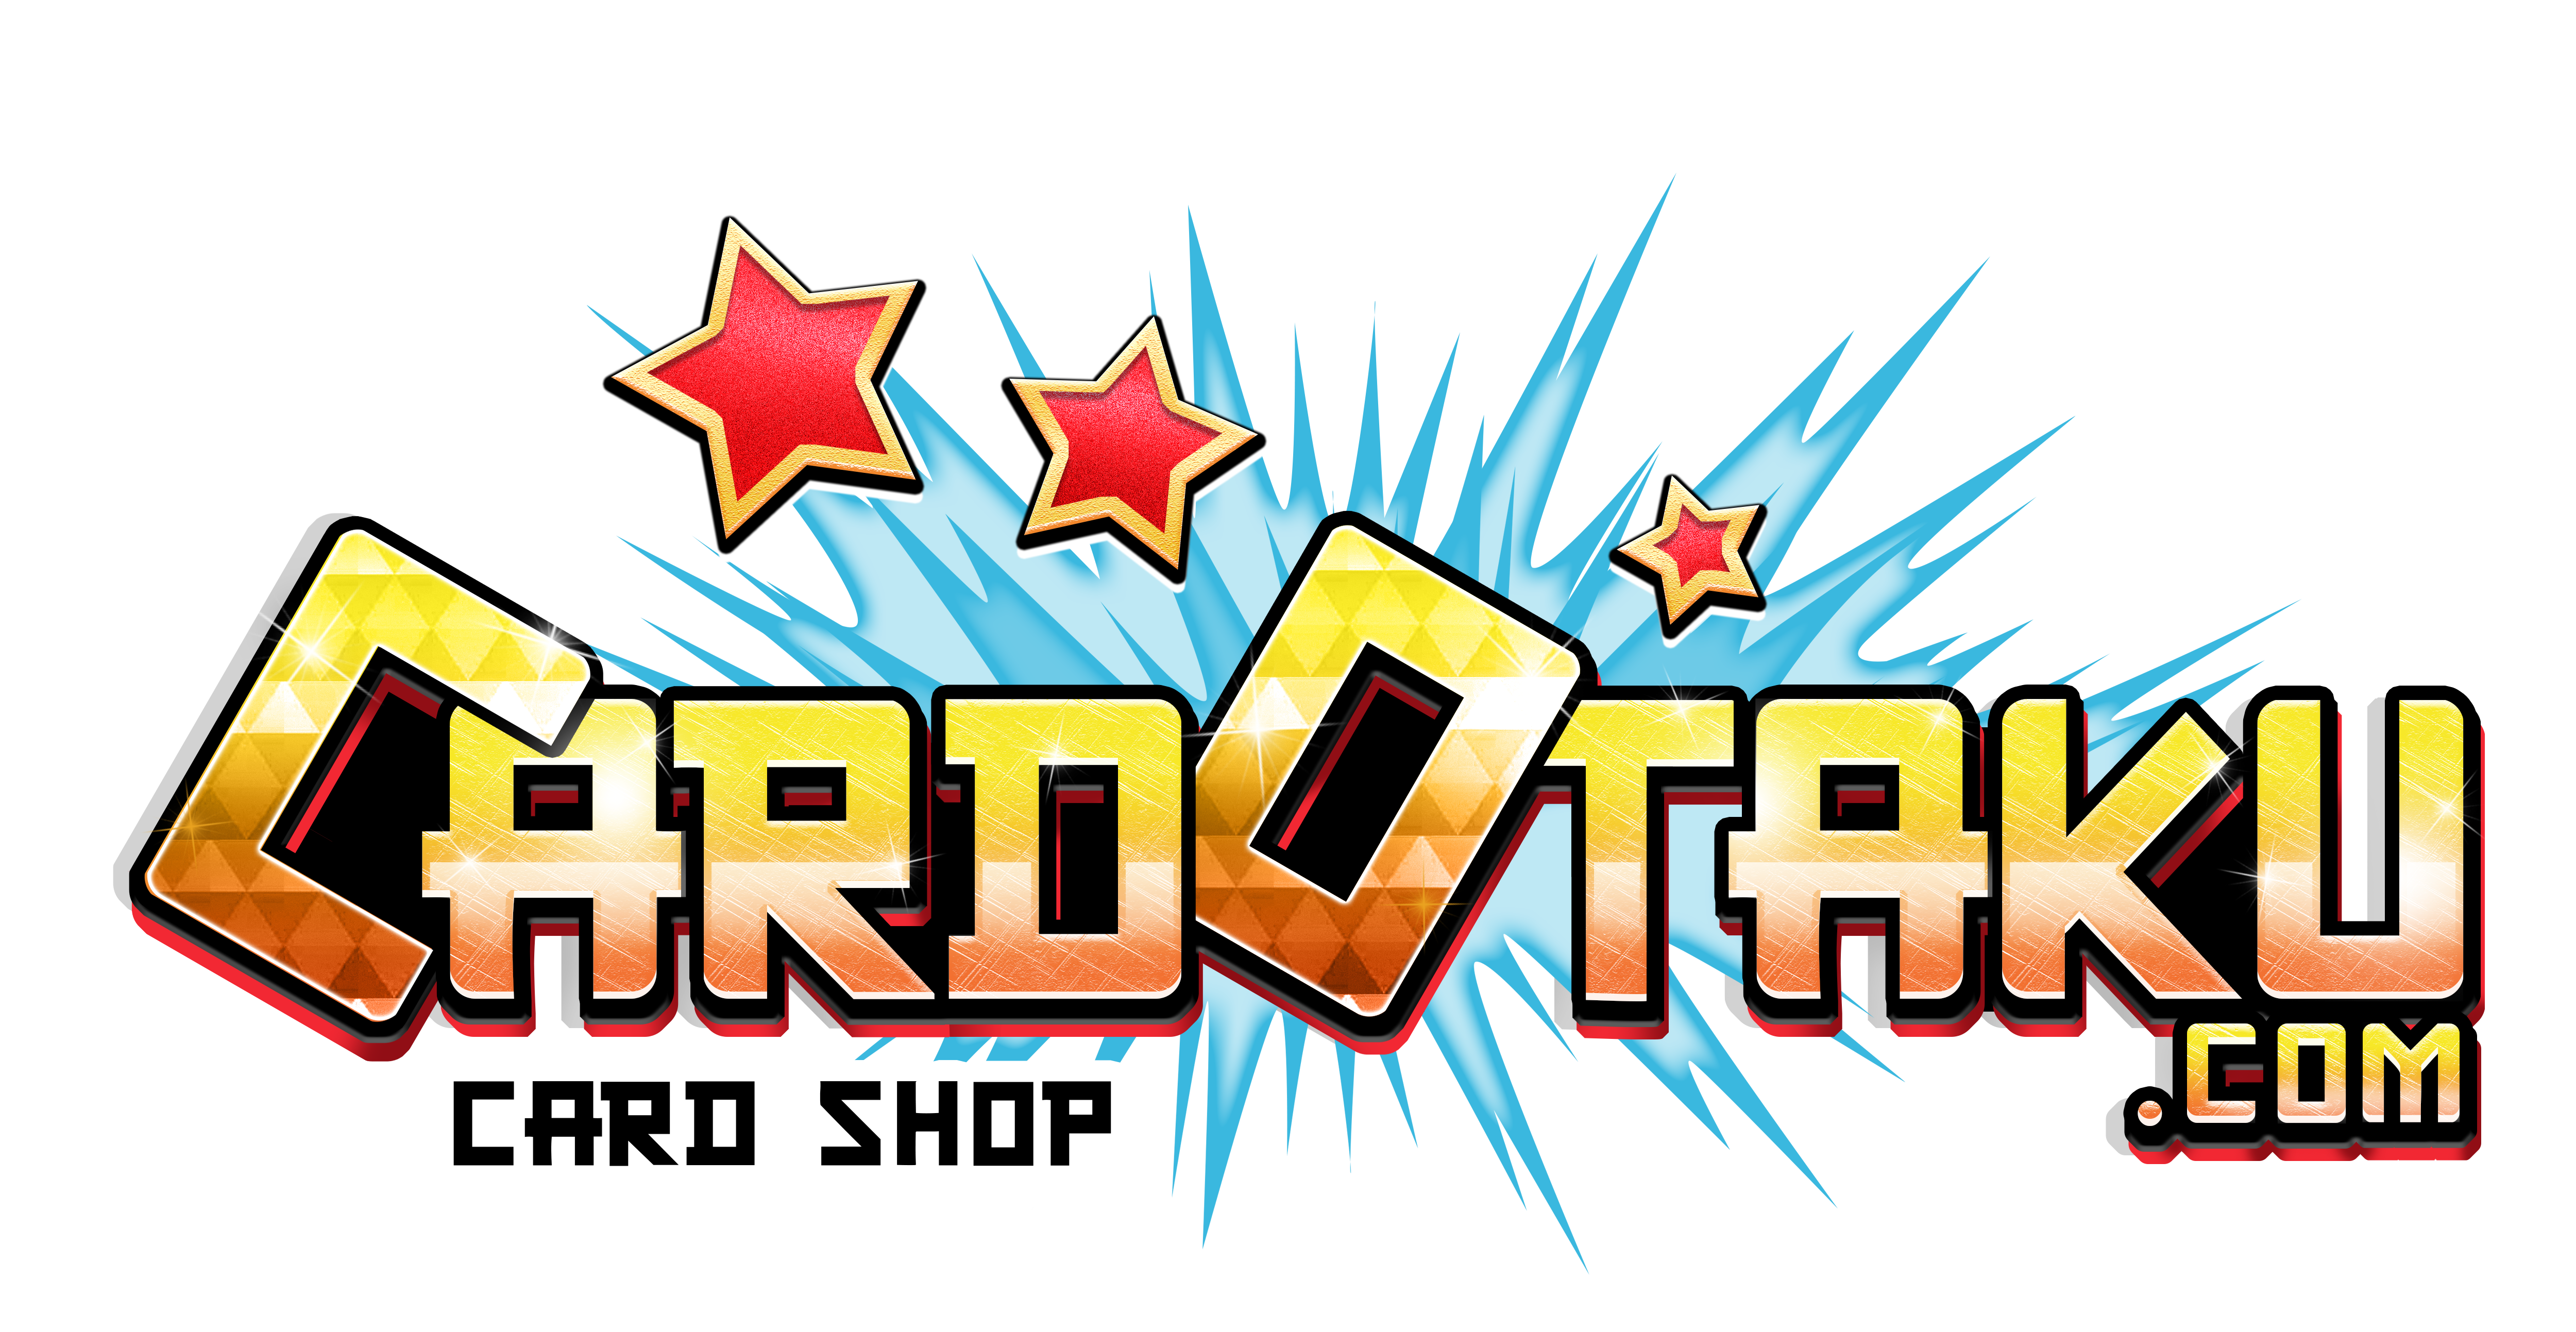 Trading Card Shop CARDOTAKU is a professional online shop that sells trading cards in general, including Yu-Gi-Oh!, Pokemon cards and Dragon Ball Heroes, and other collectibles from Japan.